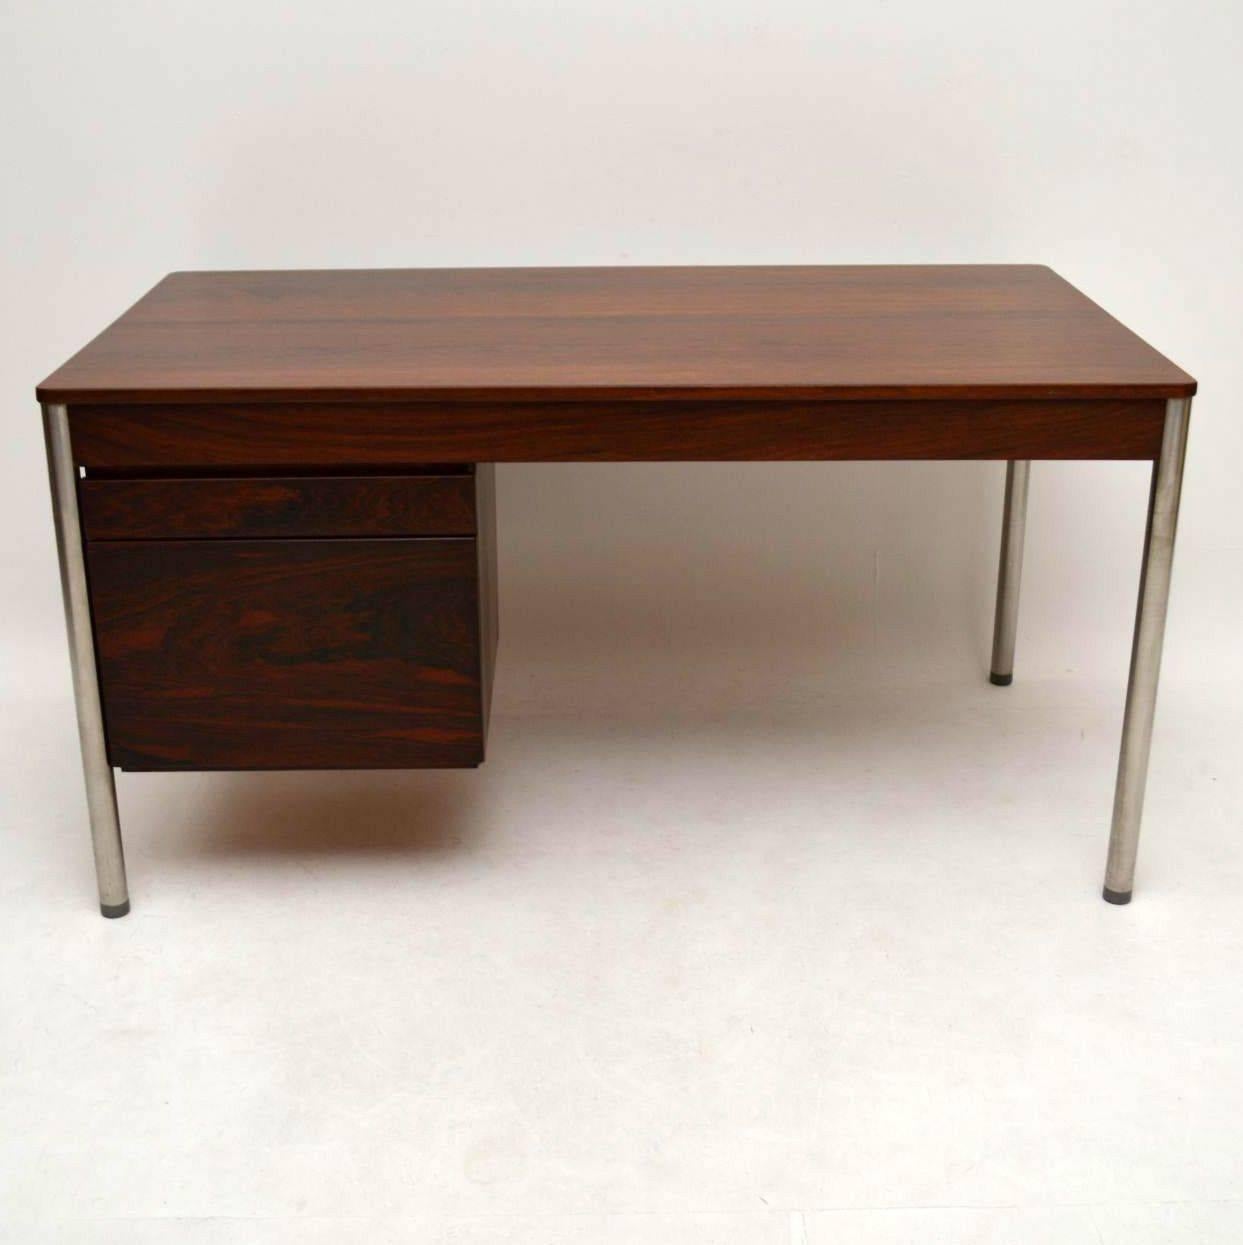 A stylish and rare one off vintage desk, this was made by Archie Shine and dates from the 1960s-1970s. The previous owner was a friend of Archie Shine, and we were told that Archie Shine himself made this for his wife when she asked him for a desk.